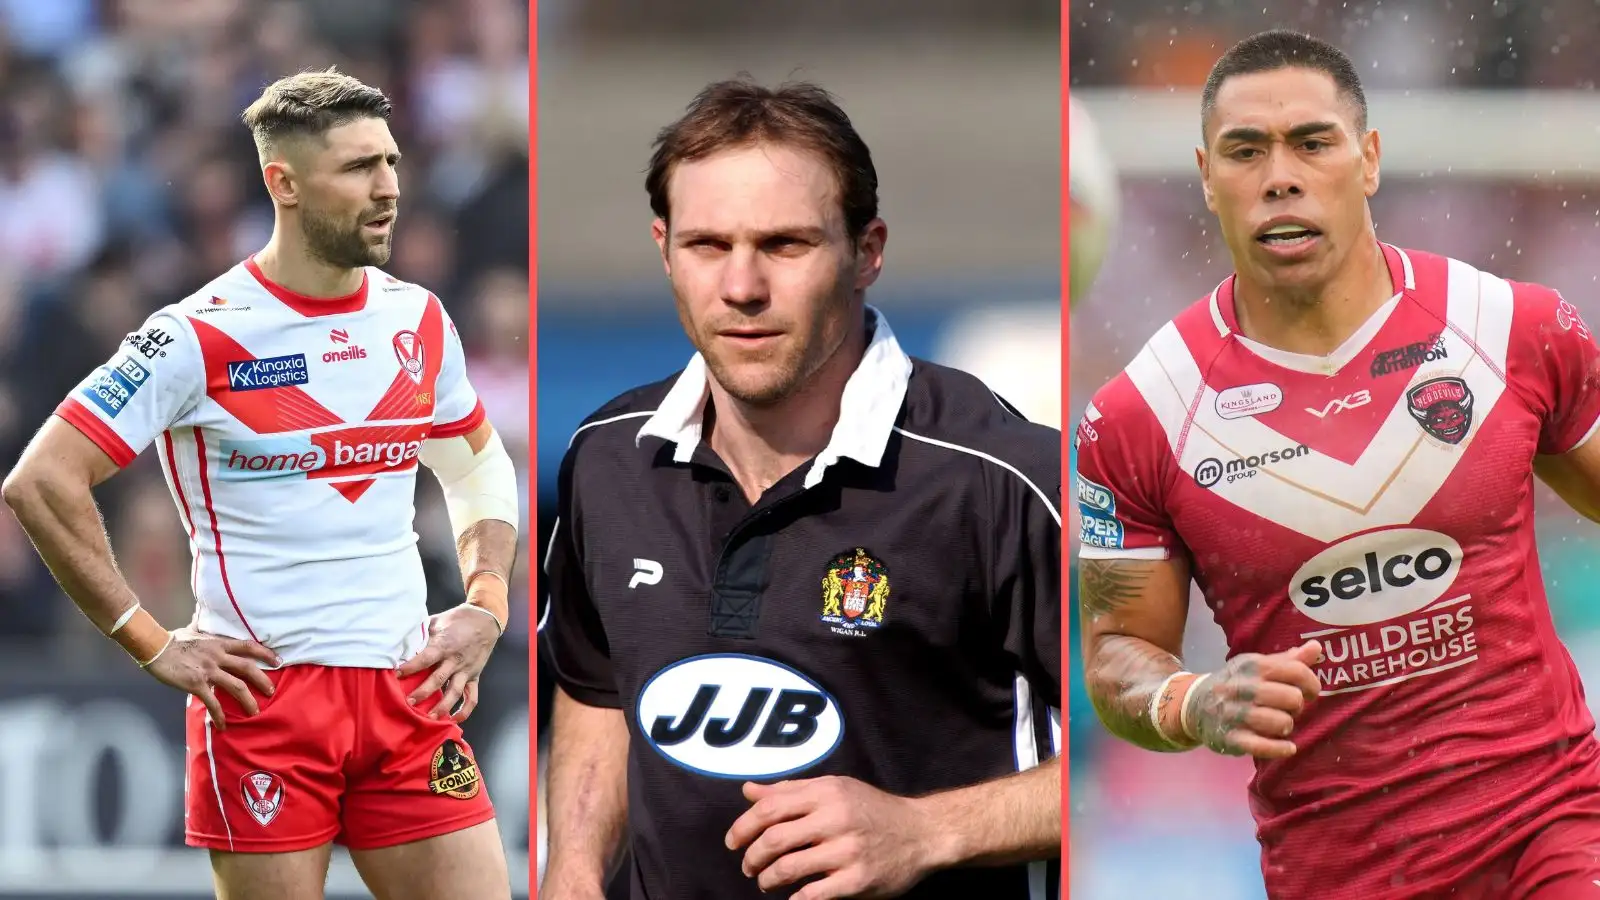 13 of the strangest rugby league injuries: Chickenpox, Impaled teeth & Lightning McQueen…